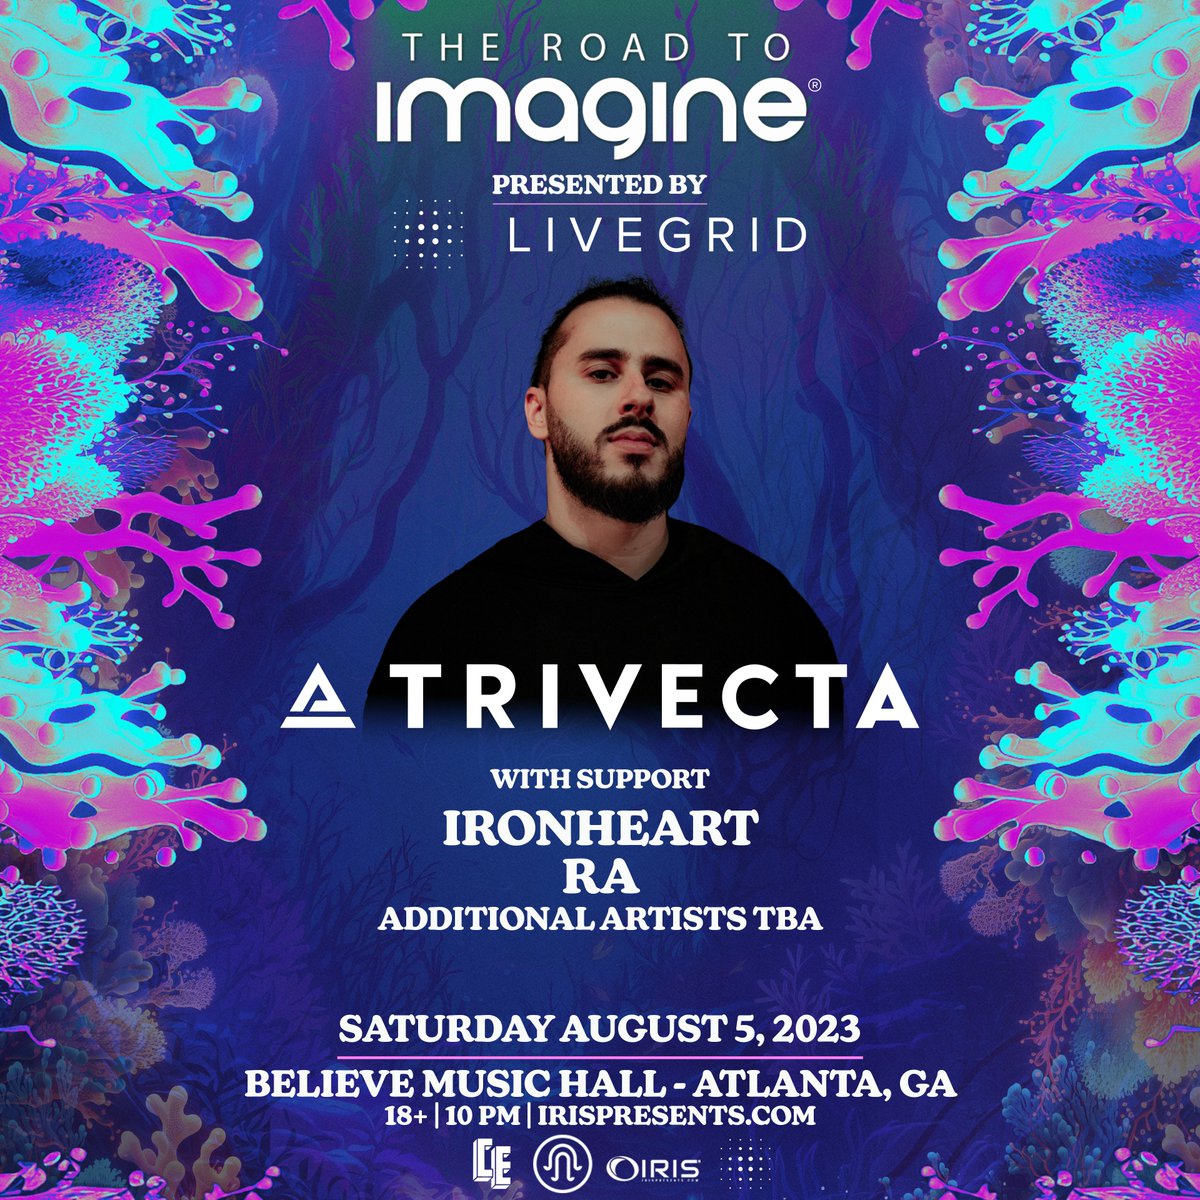 Buckle up, Imaginers! The countdown to #IMF2023 has begun, and we're hitting the ROAD TO IMAGINE in Atlanta at Believe Music Hall with @TrivectaMusic, @IronheartBass, @powerofra_, 

We are excited to offer an opening set at this show to a local DJ via our partnership @LIVEGRID_io